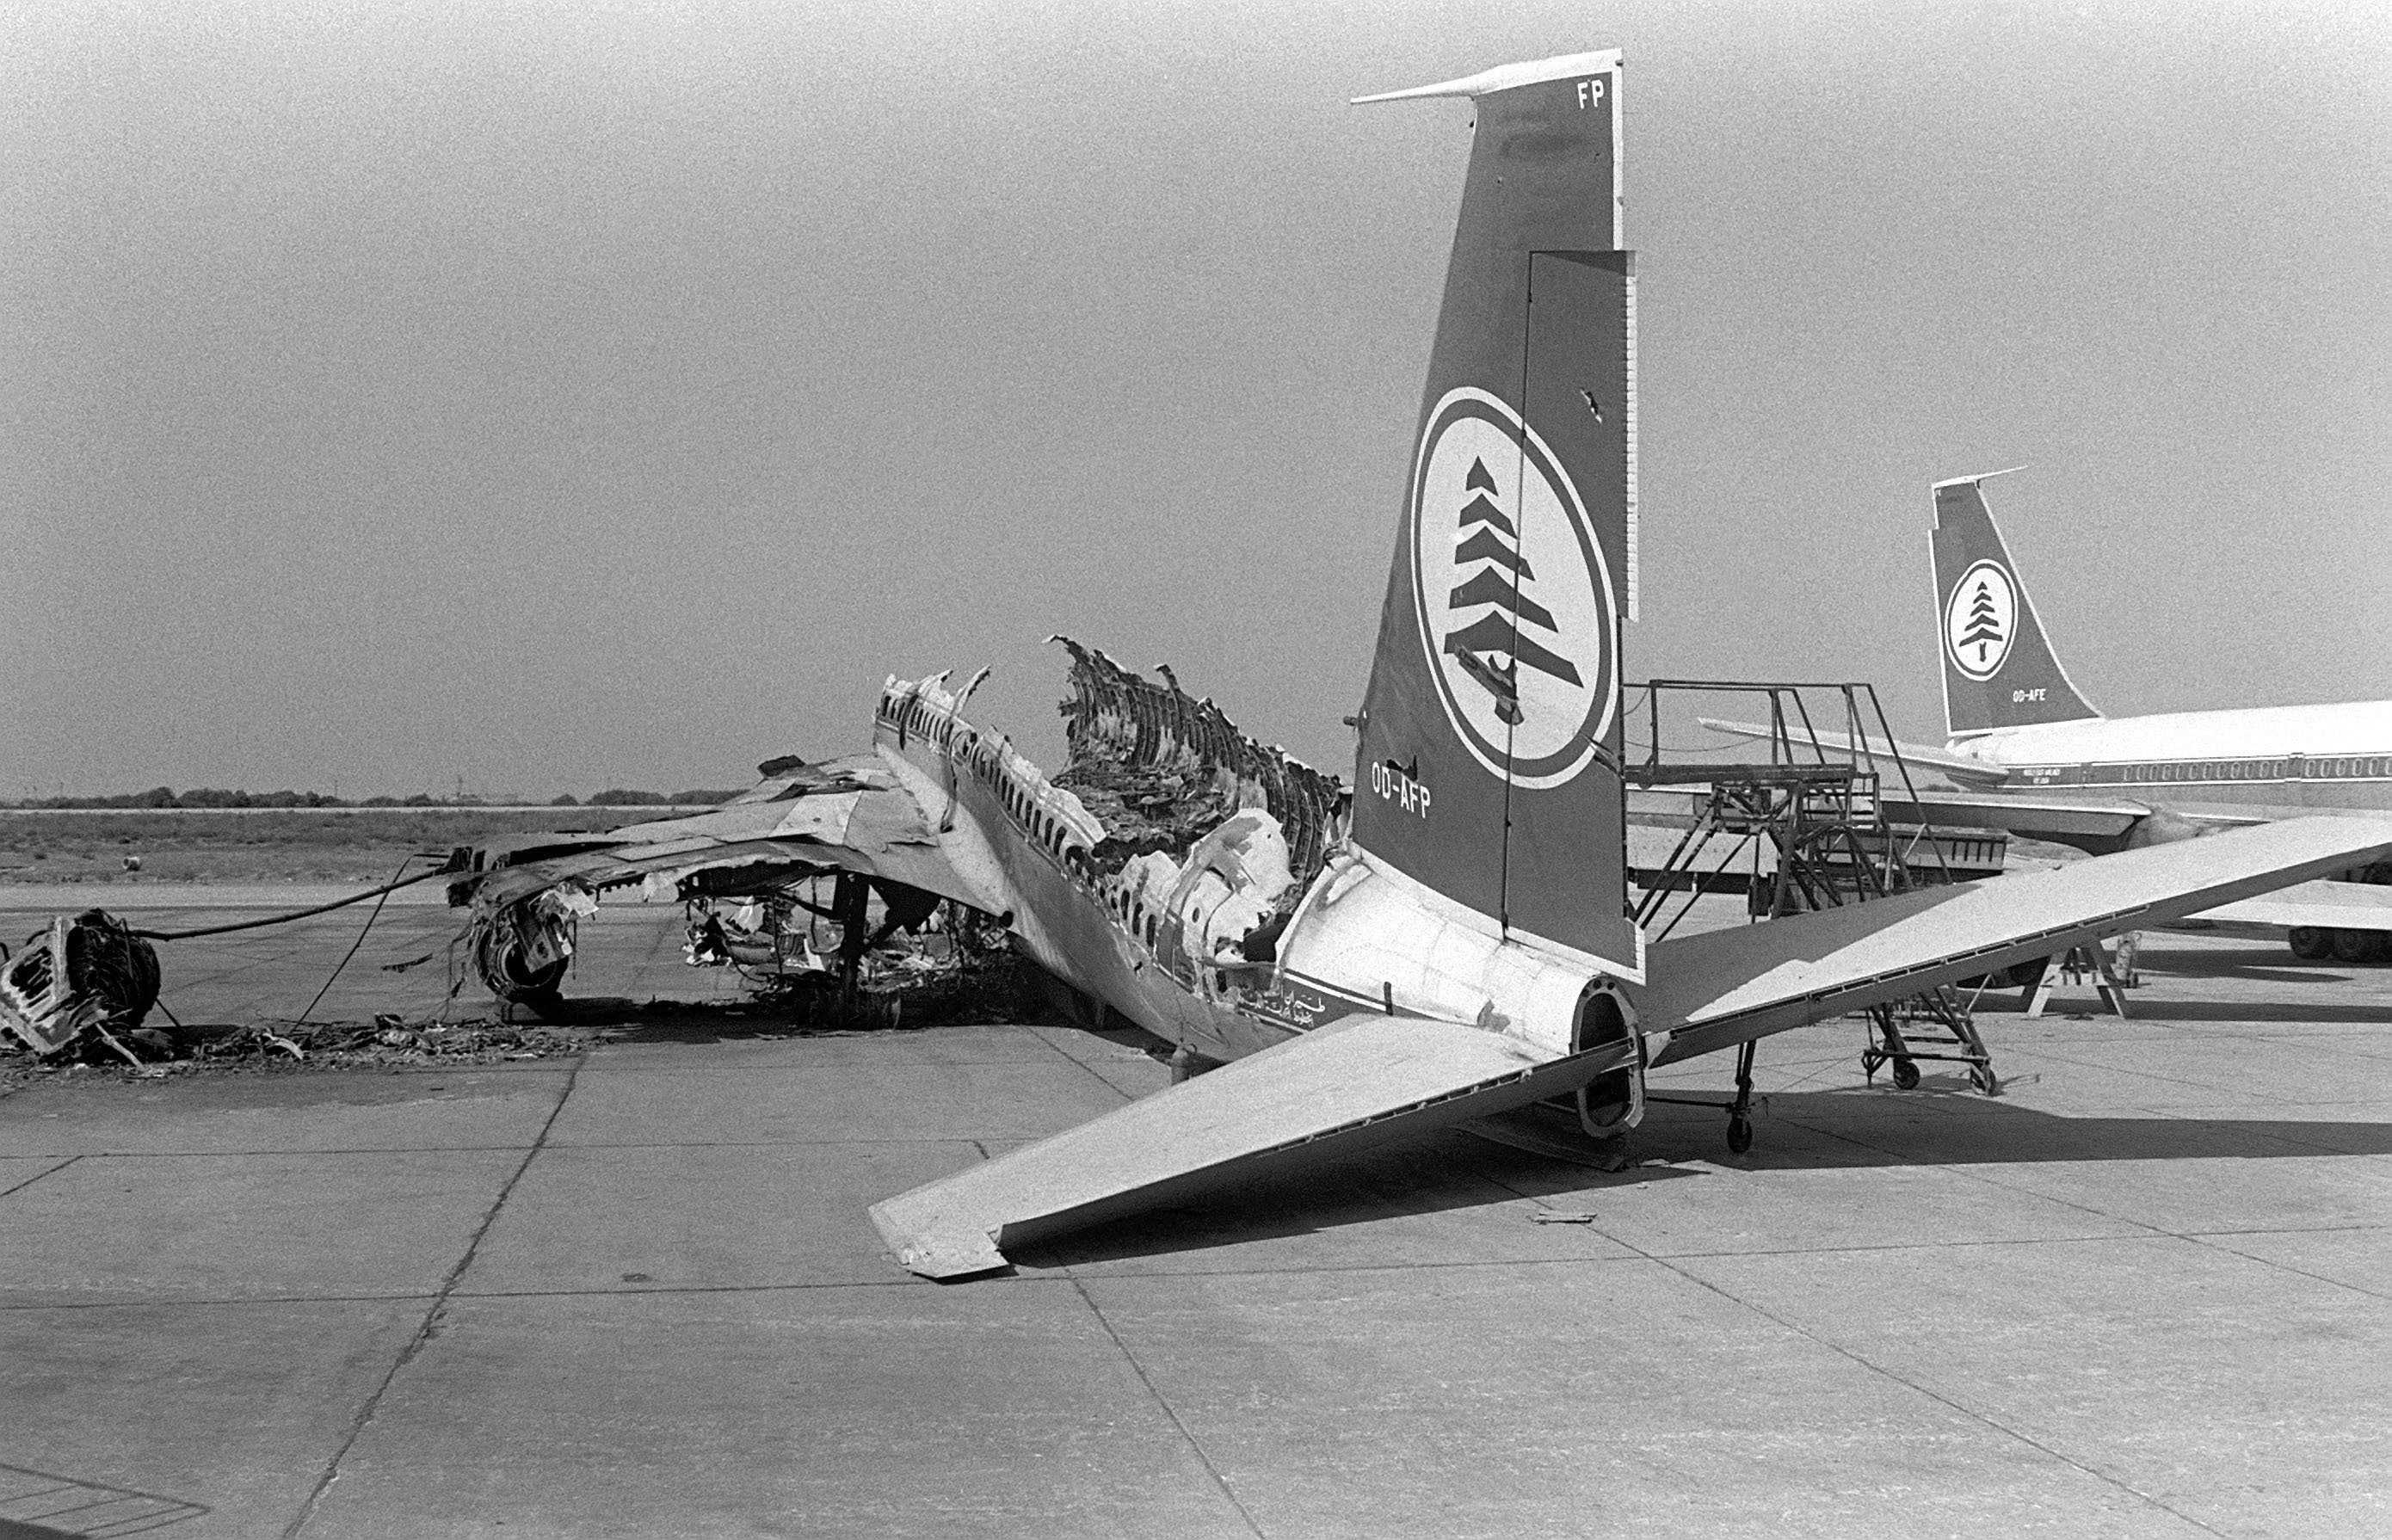 Destroyed MEA aircraft 1982